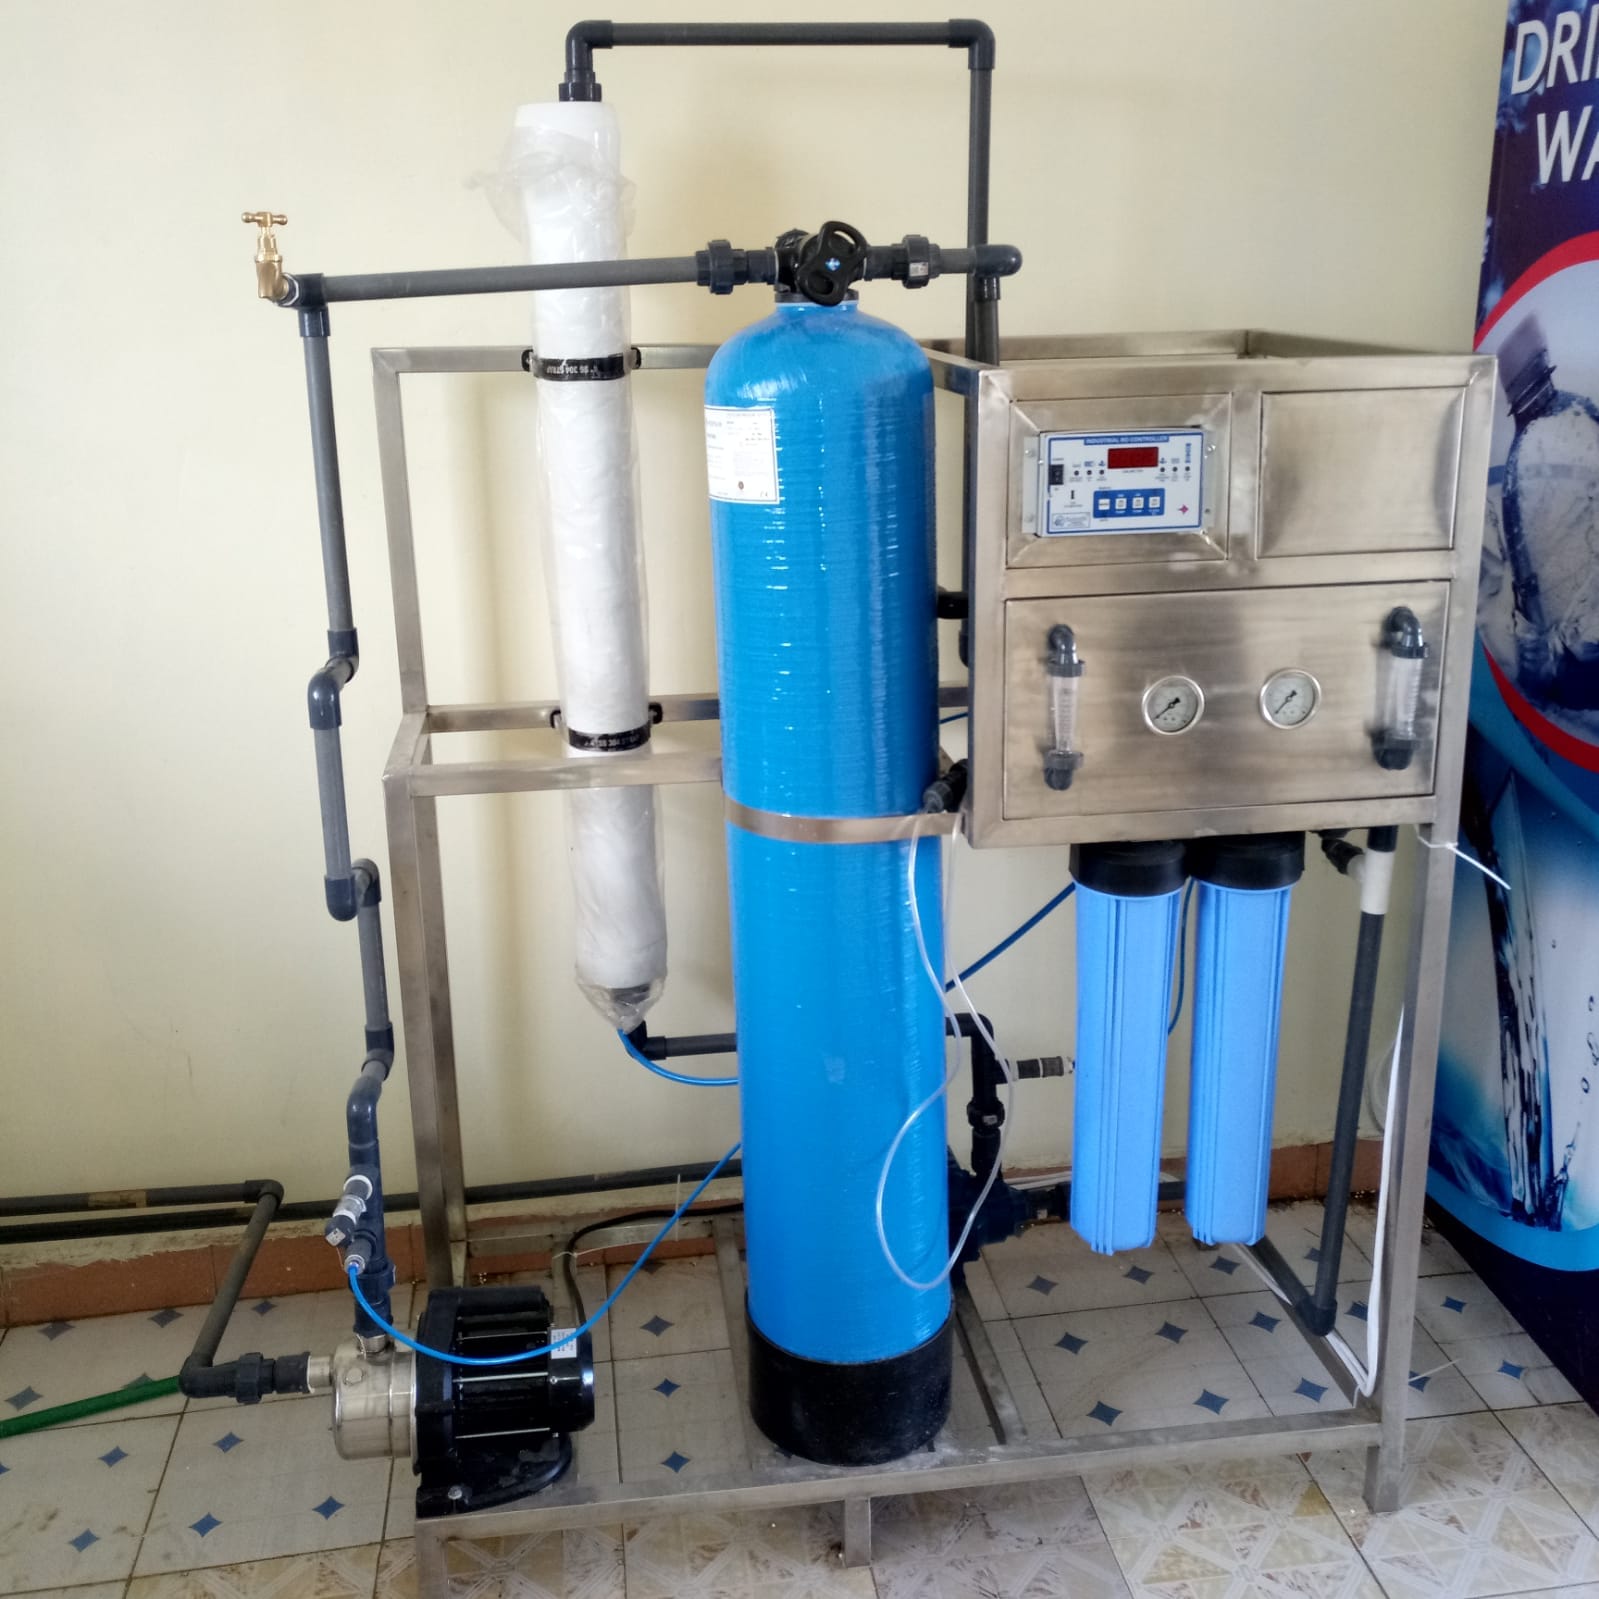 How much does a water purifier cost in Kenya?